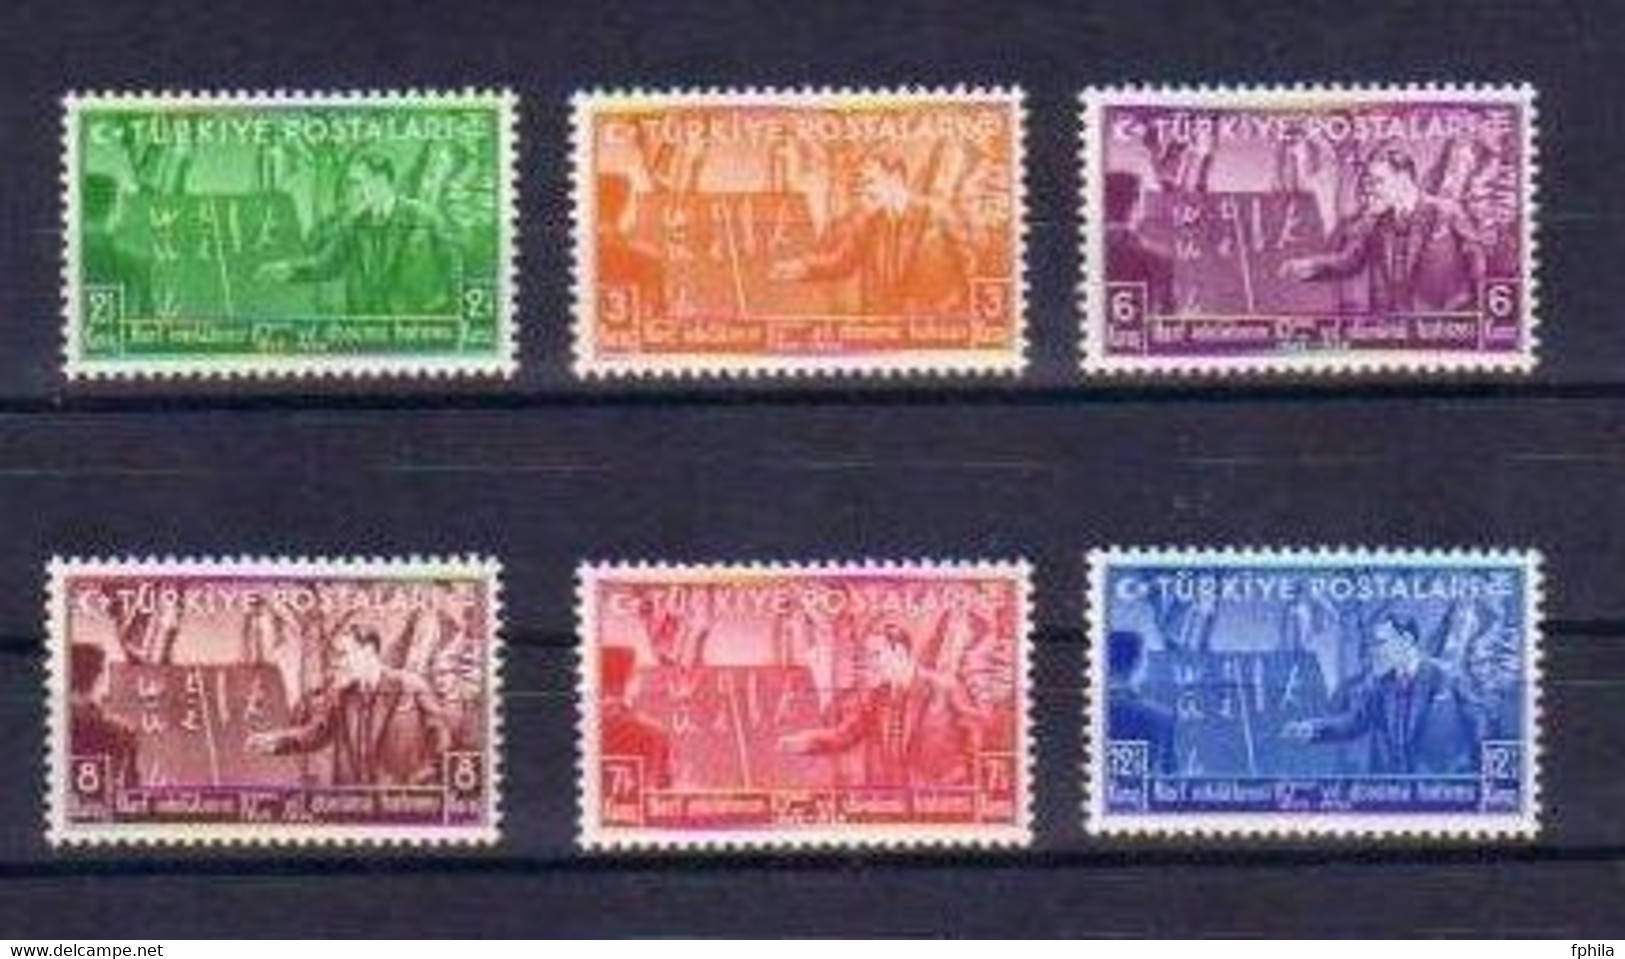 1938 TURKEY THE 10TH ANNIVERSARY OF THE REFORM OF THE TURKISH ALPHABET MNH ** - Unused Stamps